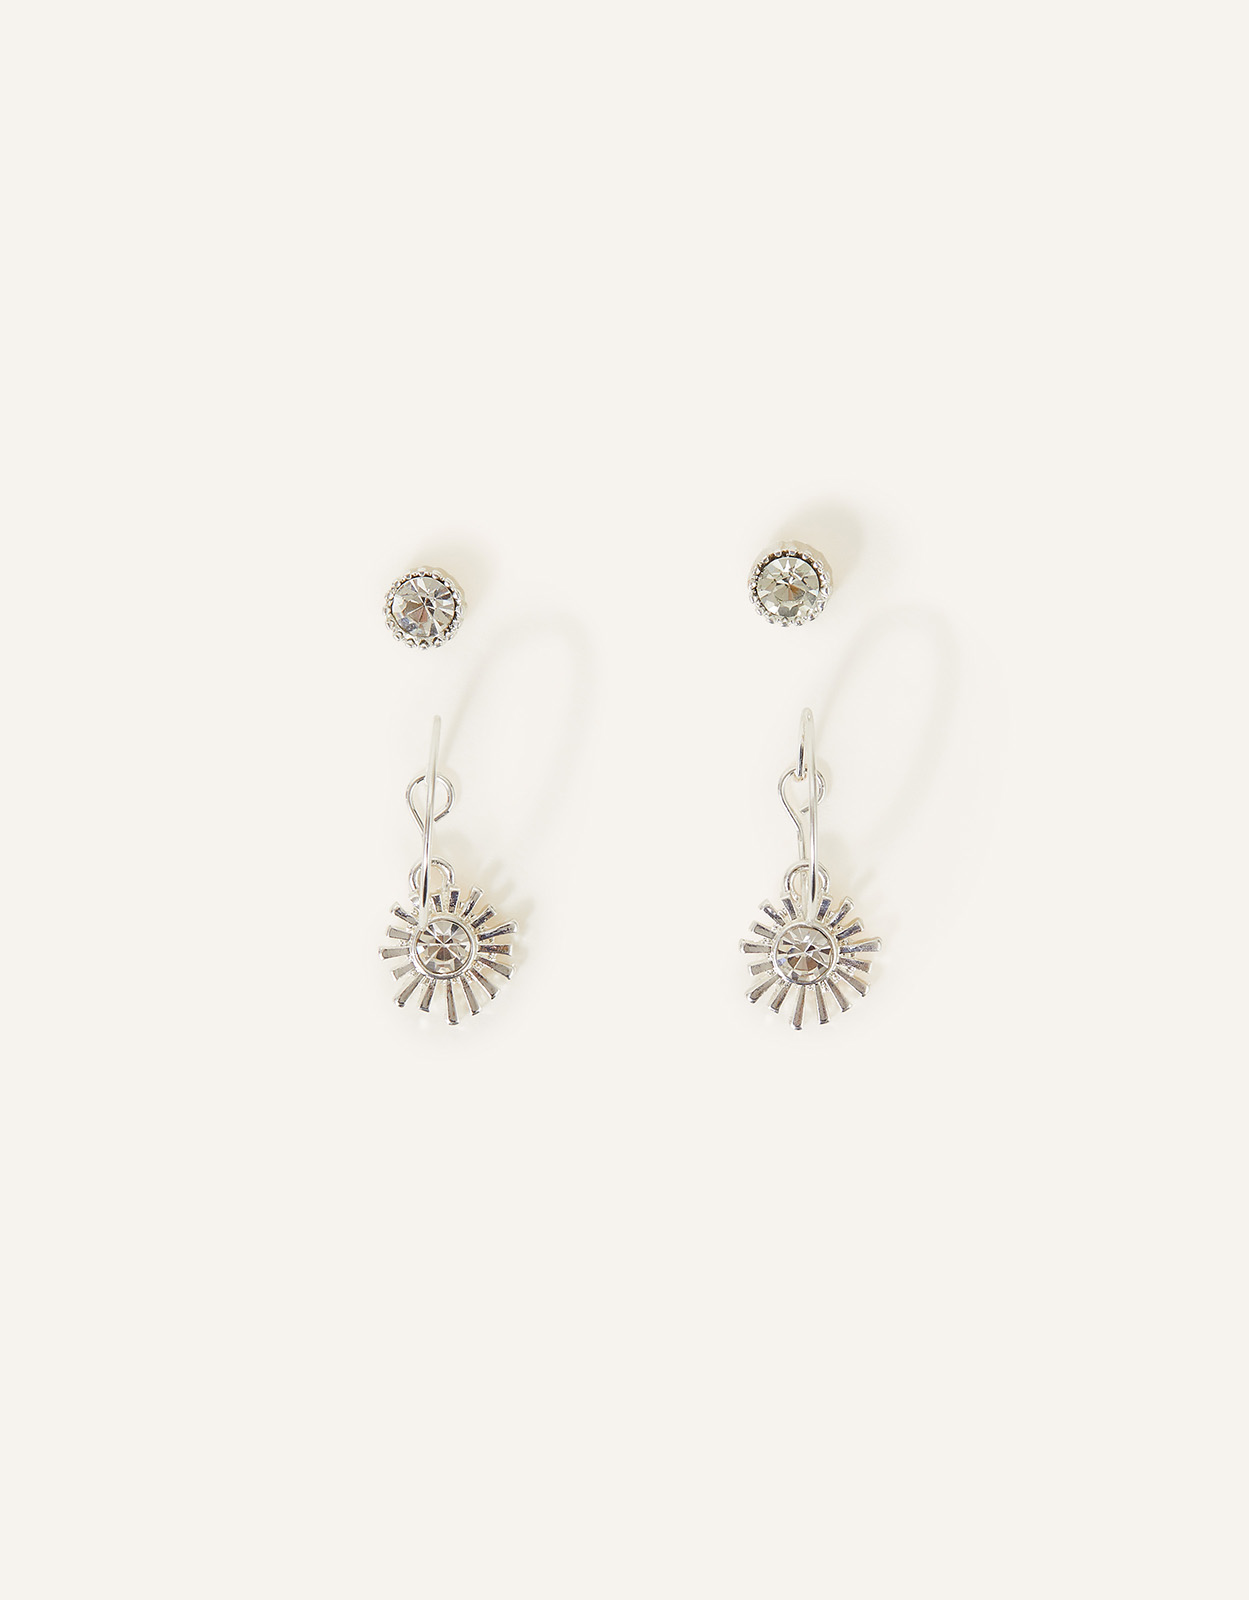 Accessorize Women's Starburst Hoop and Stud Earrings Set of Two, Size: 2cm